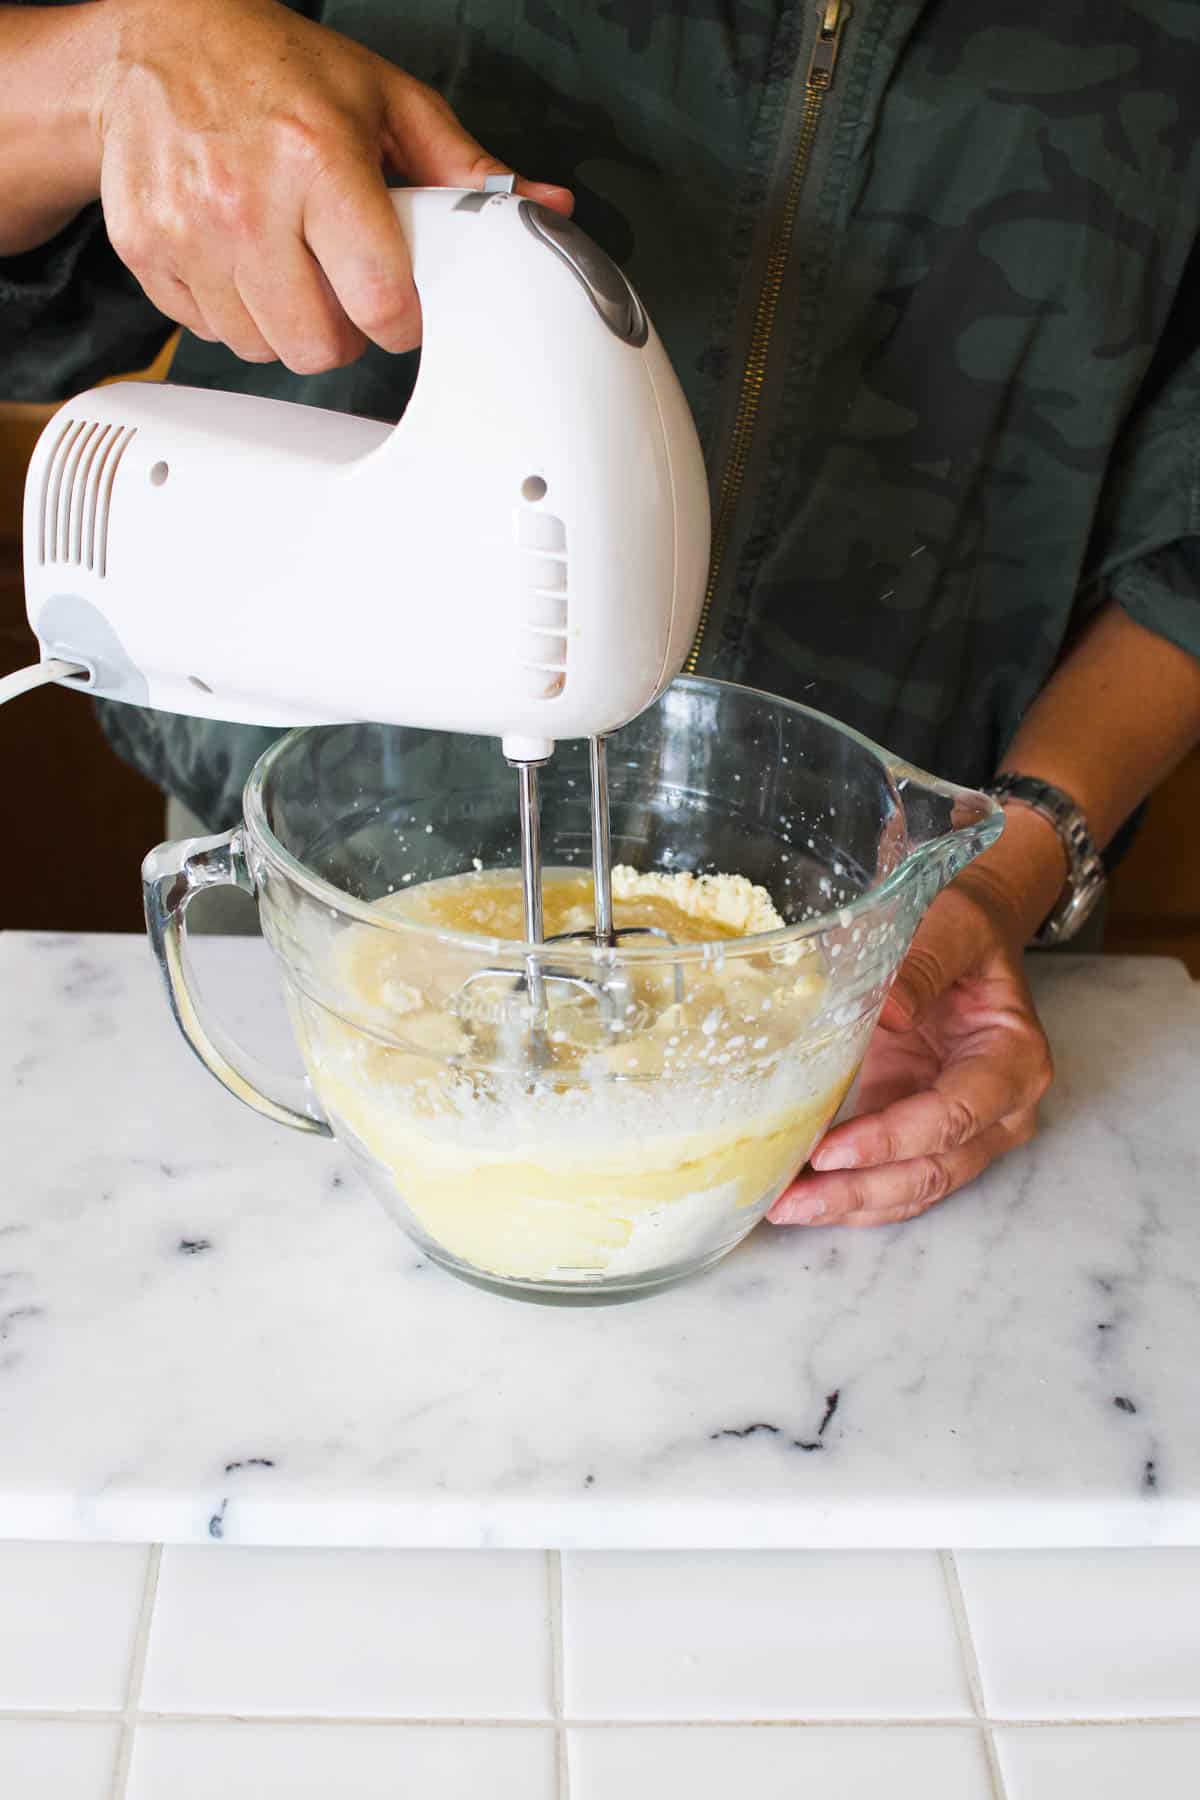 Woman mixing cake batter in a glass batter bowl with a hand mixer.